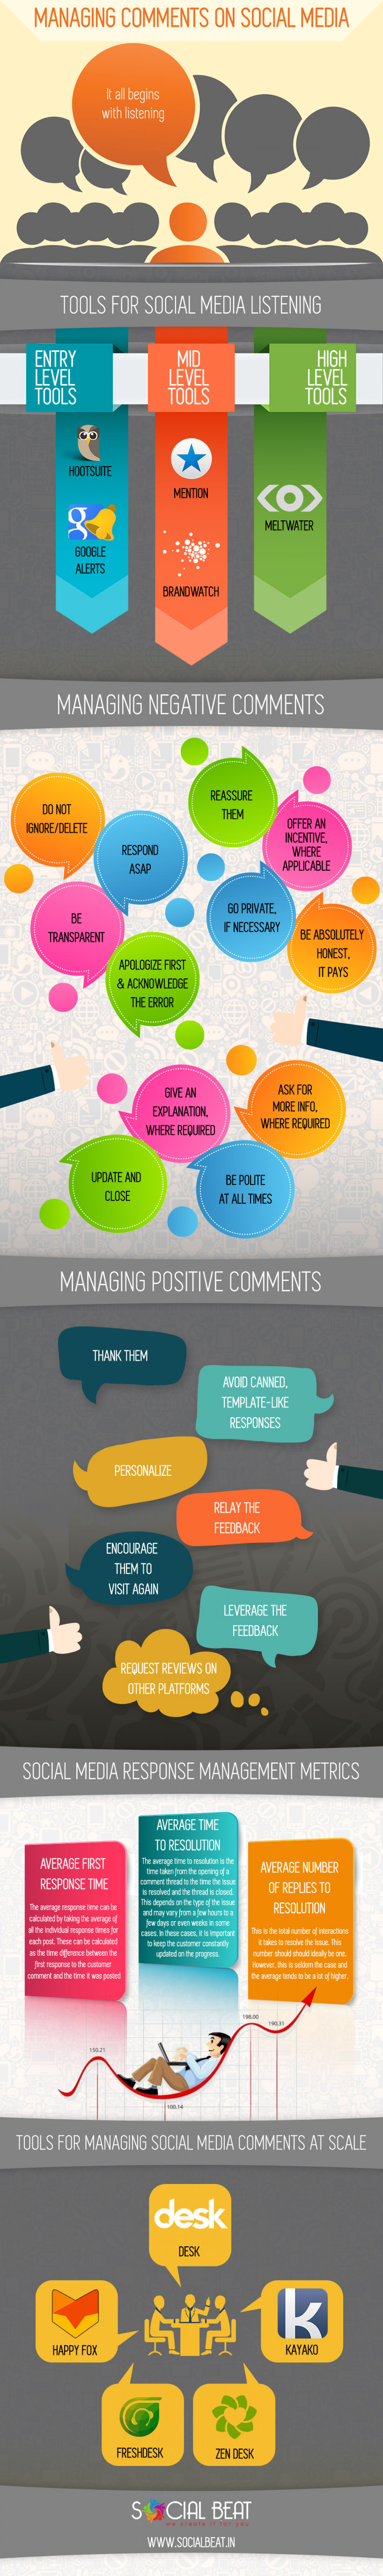 Managing social media comments Infographic